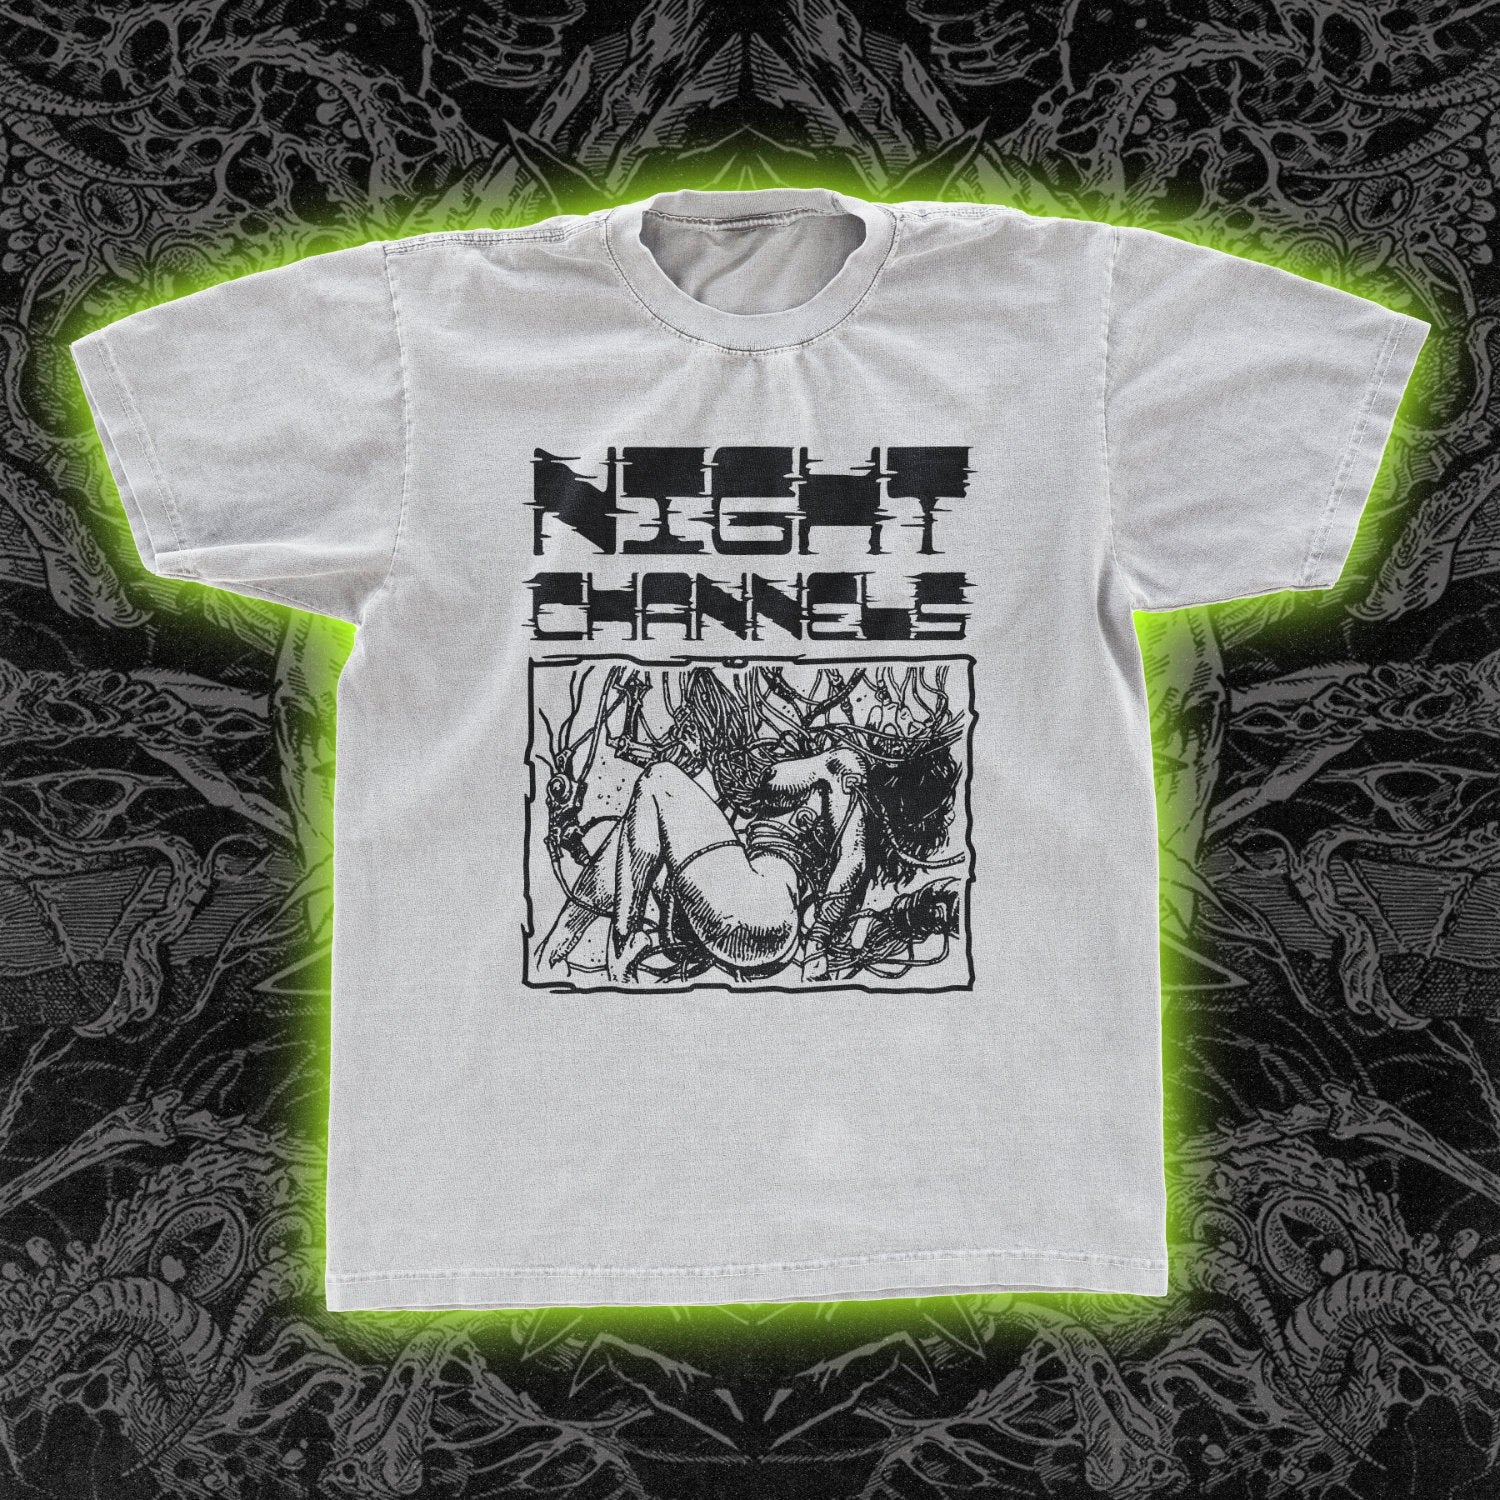 Cyber Sex Night Channels Classic Tee